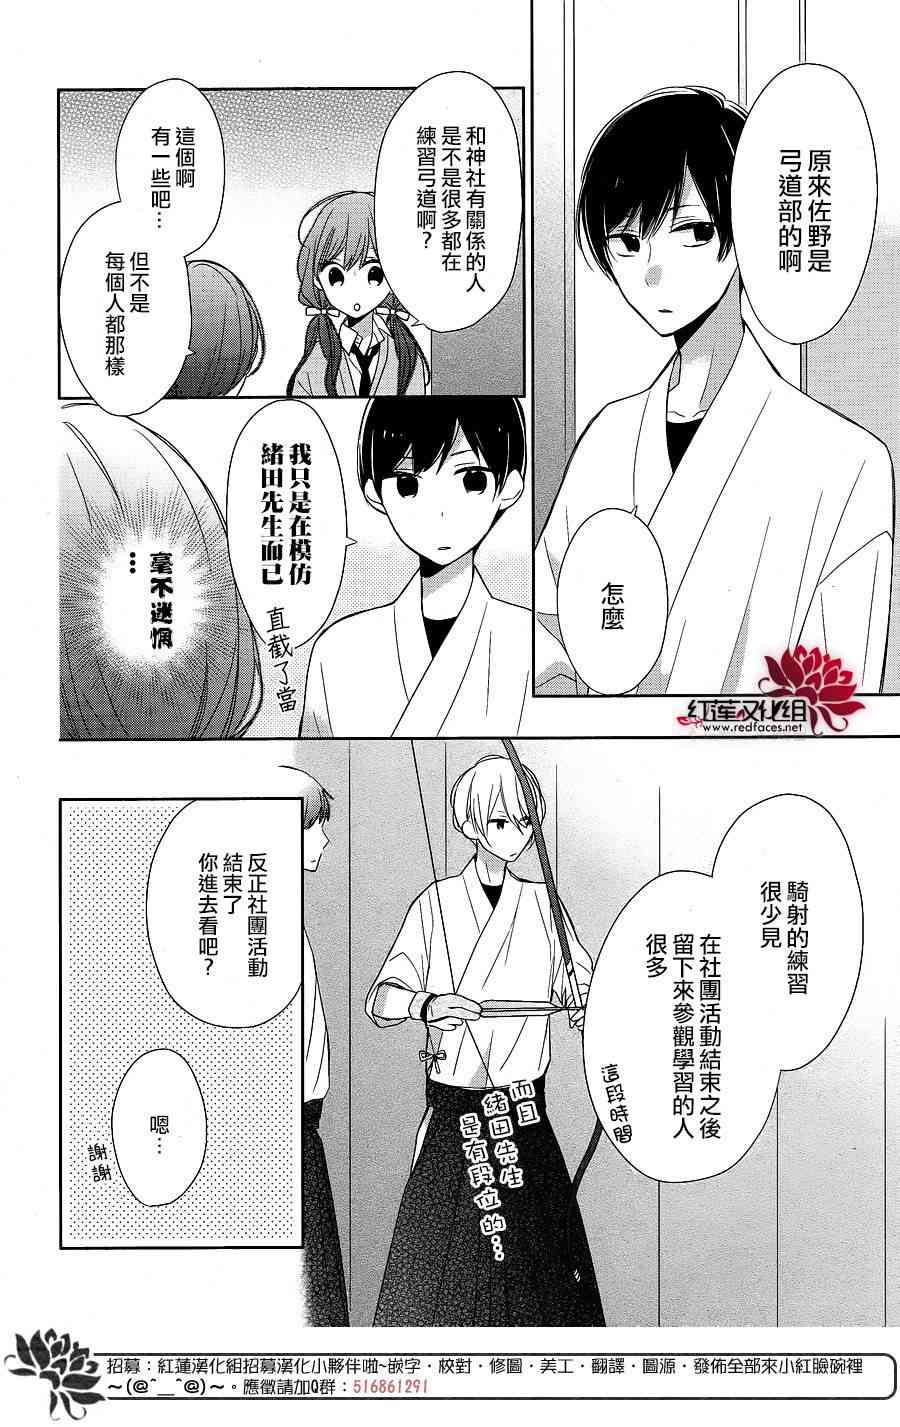 If given a second chance - 8話 - 6